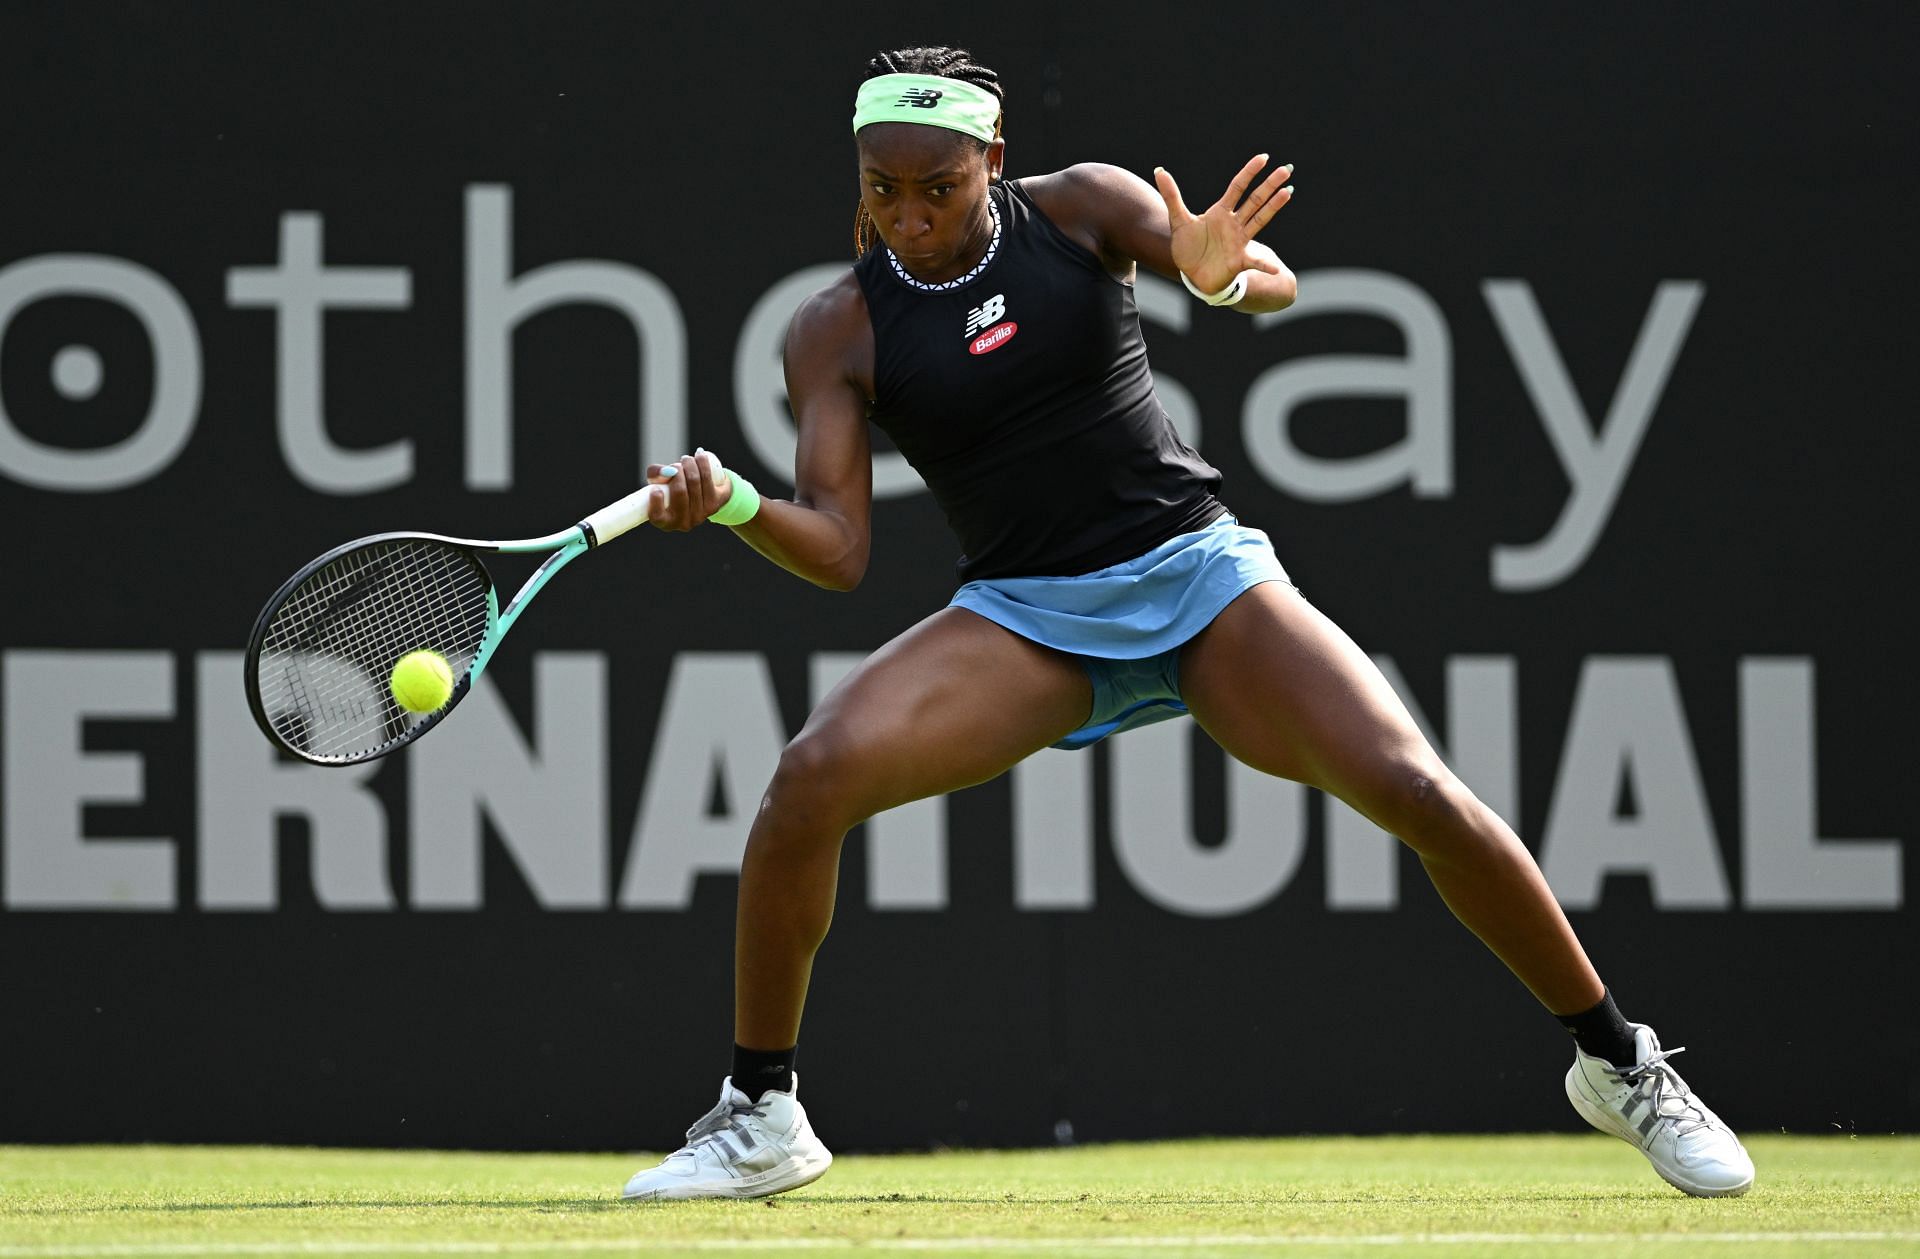 Coco Gauff plays a forehand at Rothesay International, Eastbourne